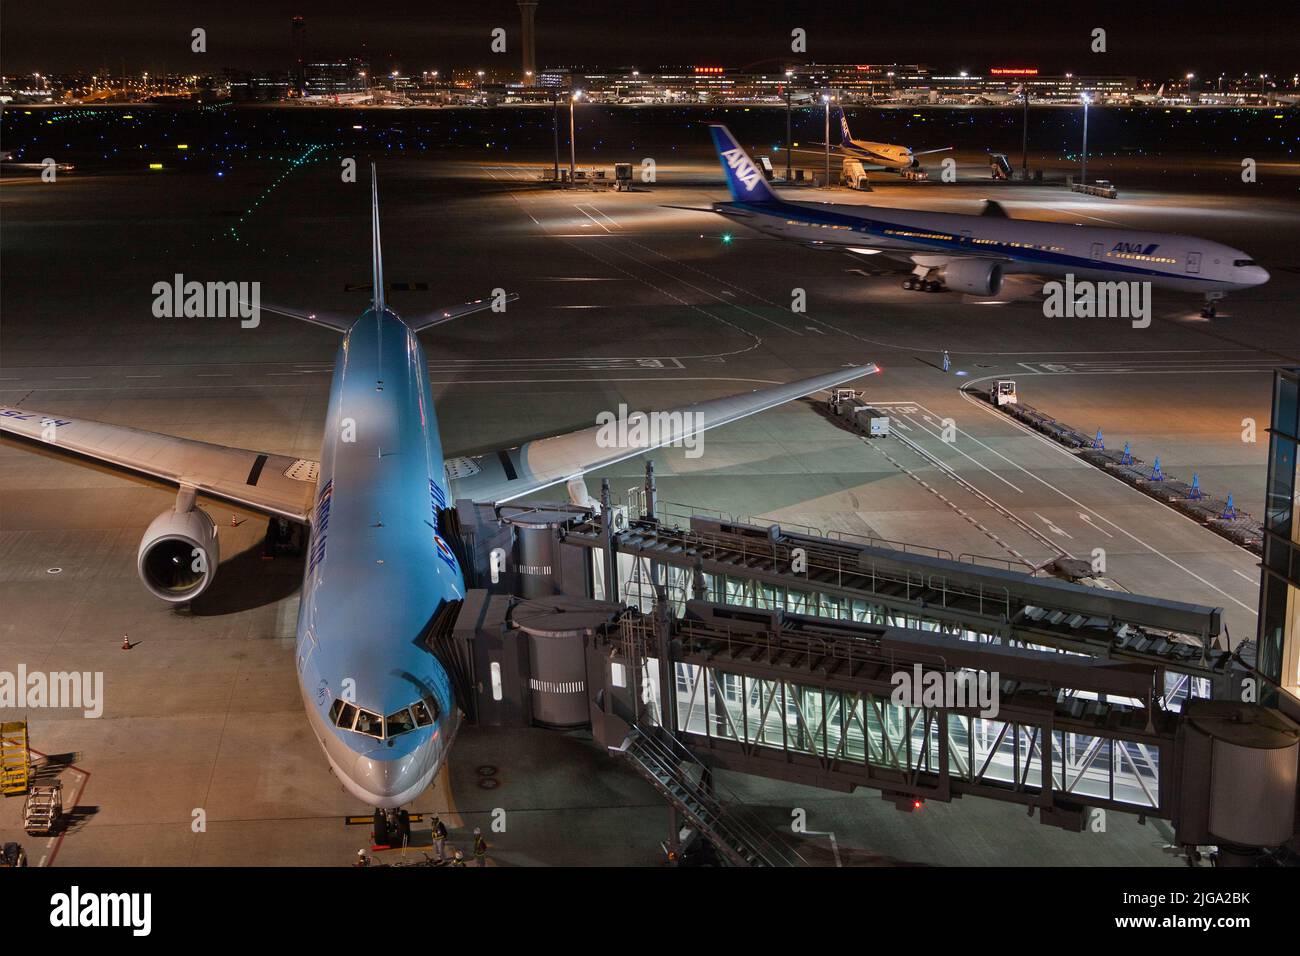 Airliners loading and taxiing at night, Haneda Airport, Tokyo, Japan Stock Photo